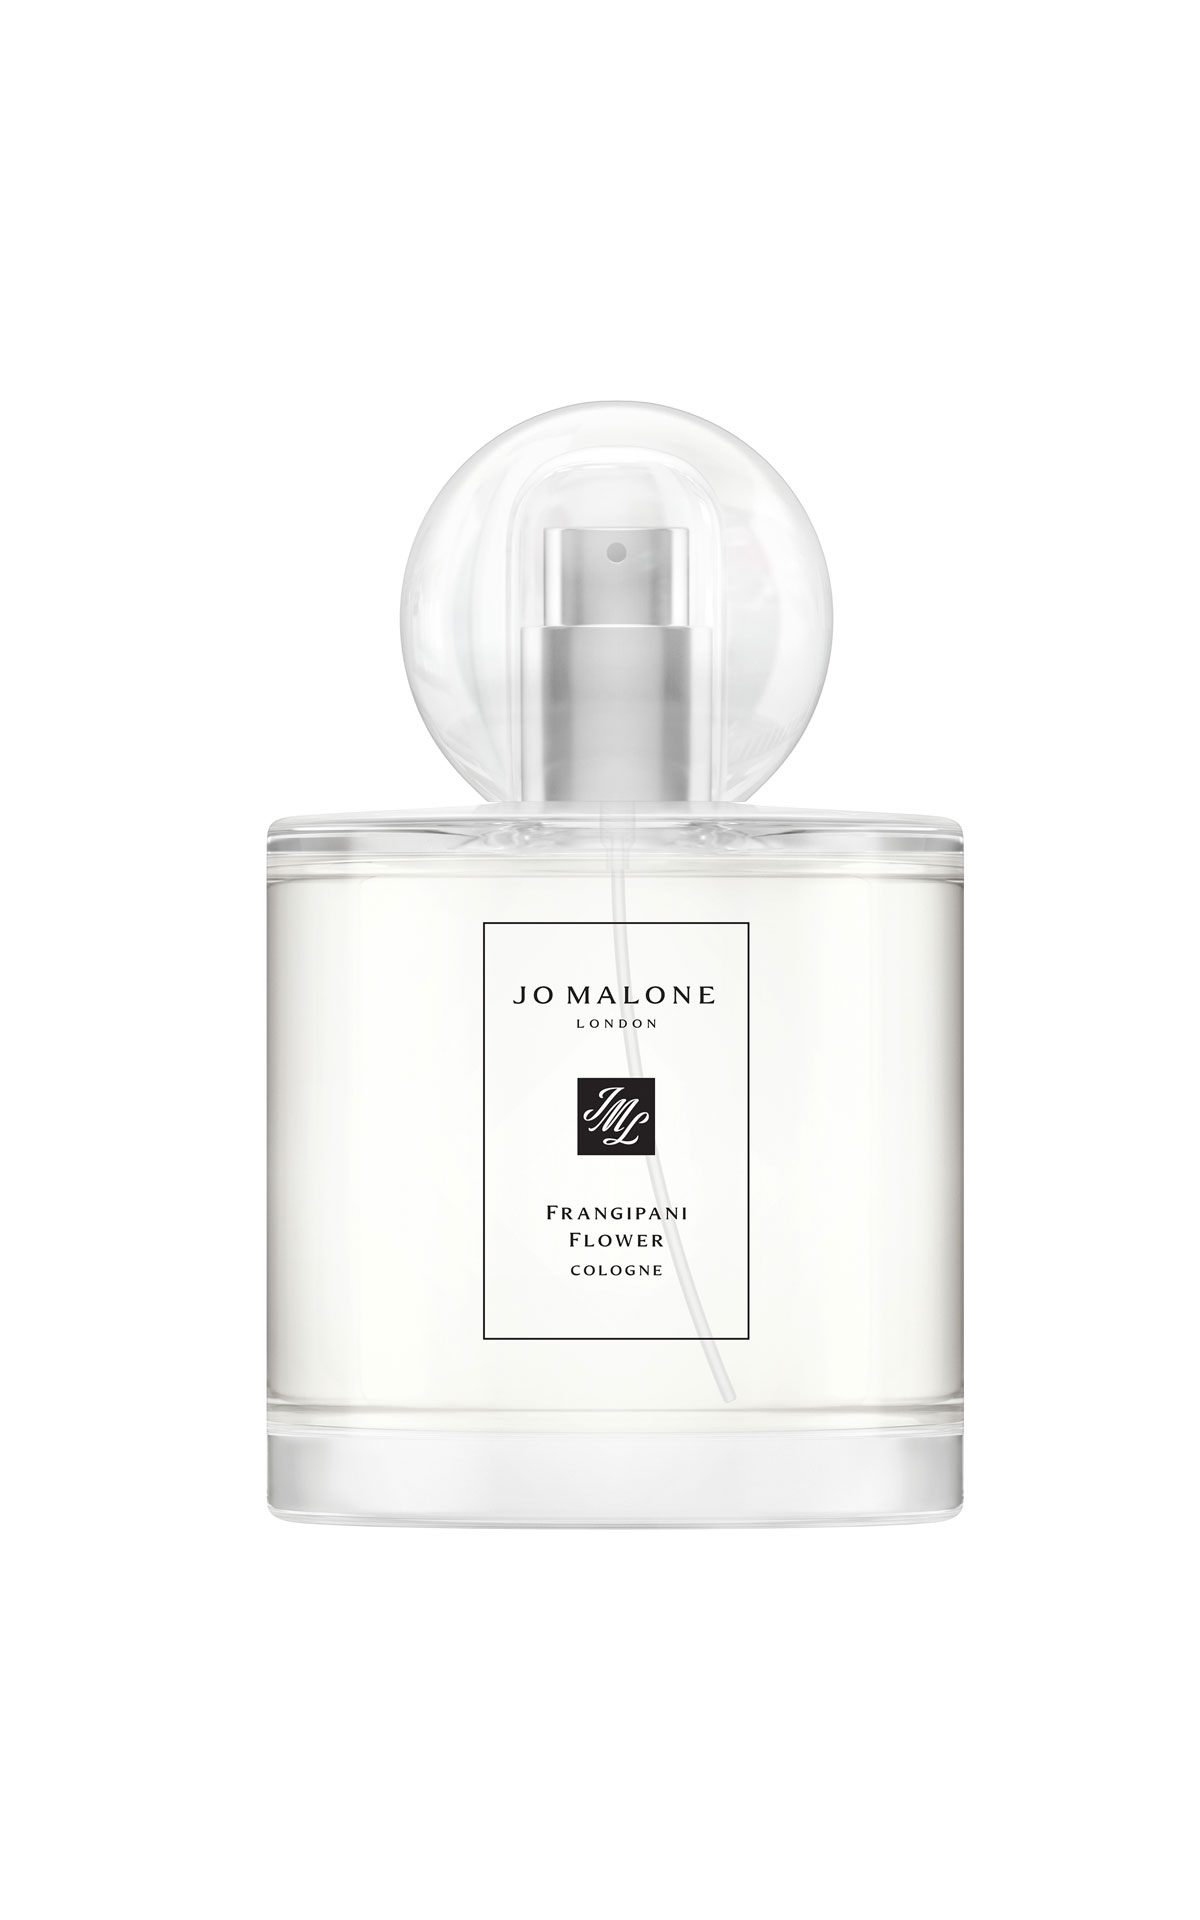 The Cosmetics Company Store Jo Malone London Fragipani flower cologne 100ml from Bicester Village